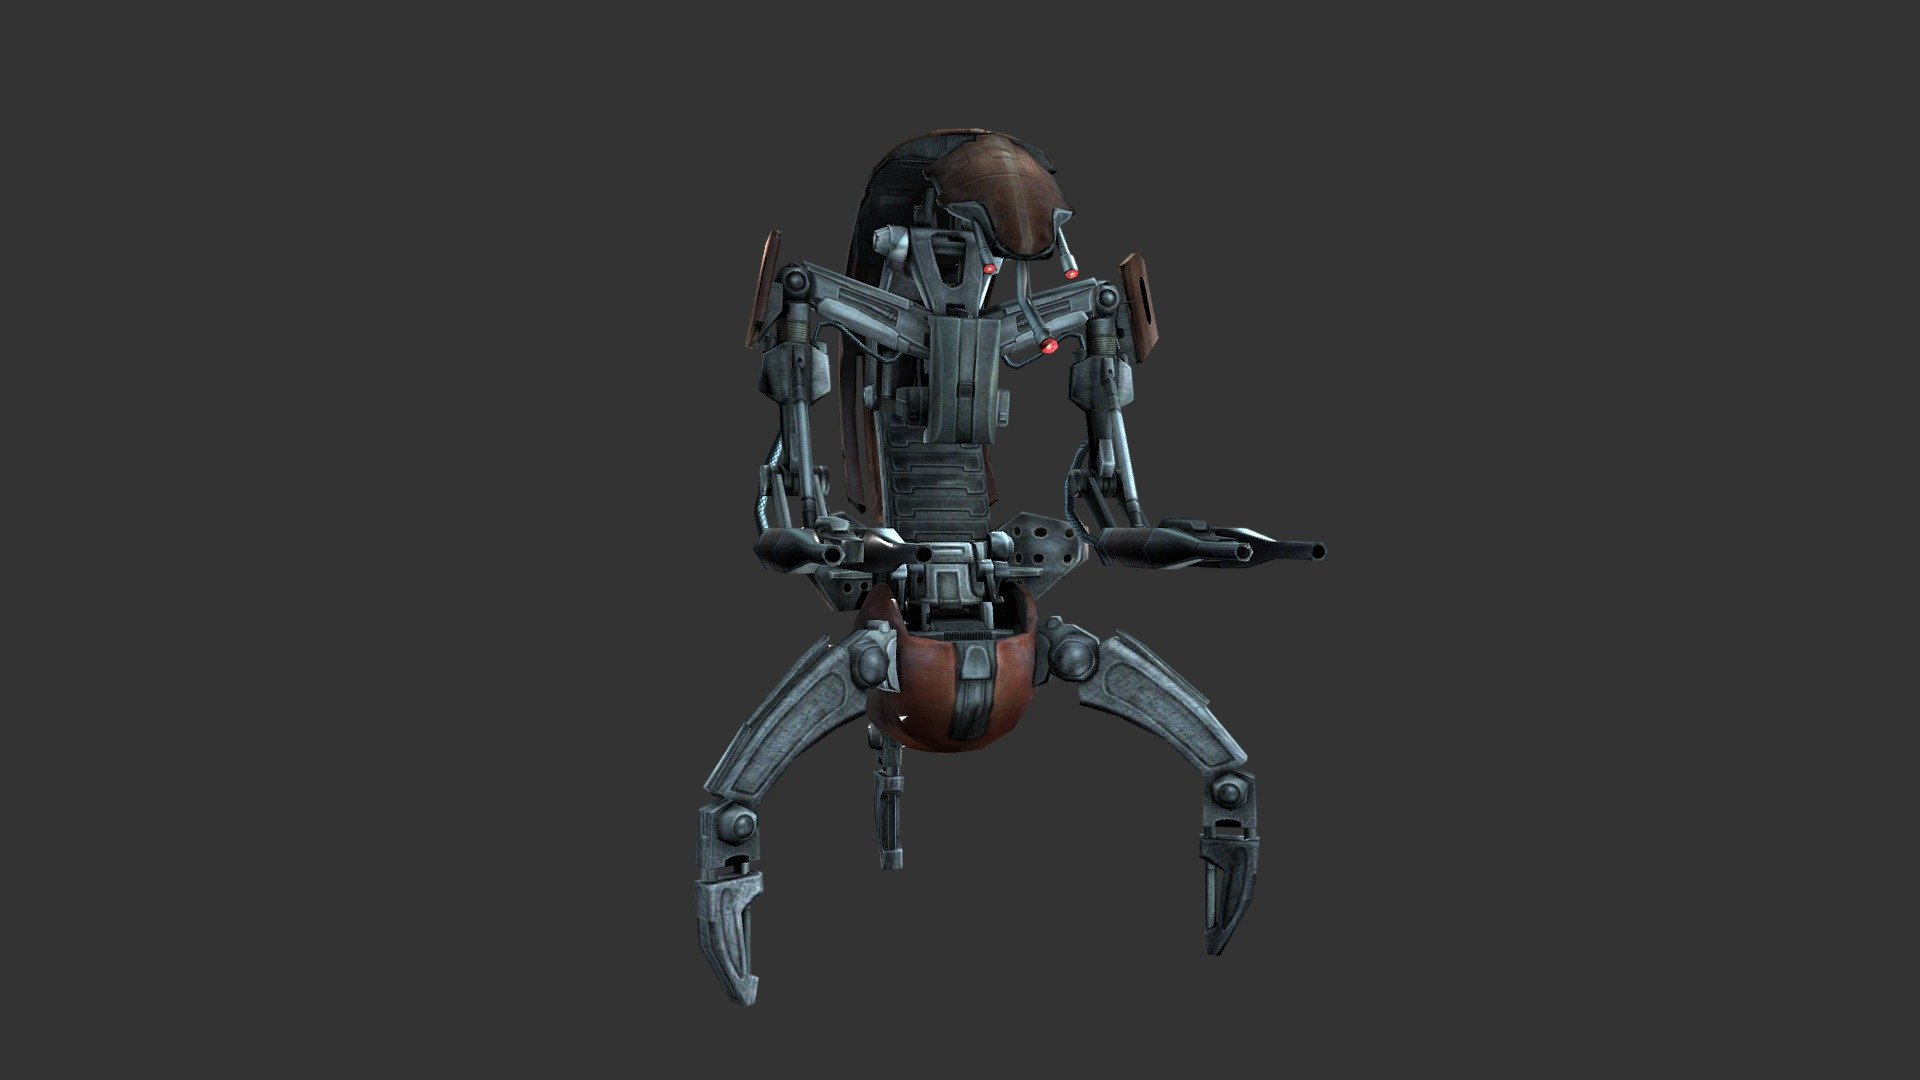 The destroyer droid can completely envelope itself in a globe of protective energy via its compact deflector shield generators.

This Droideka is just one of the many Star Wars exhibits that can seen in the Star Wars Virtual Museum.

Download the Star Wars Virtual Museum here:

http://www.starwarsvirtualmuseum.com - Droideka - 3D model by Mind Mulch for The Masses (@mindmulchforthemasses) 3d model